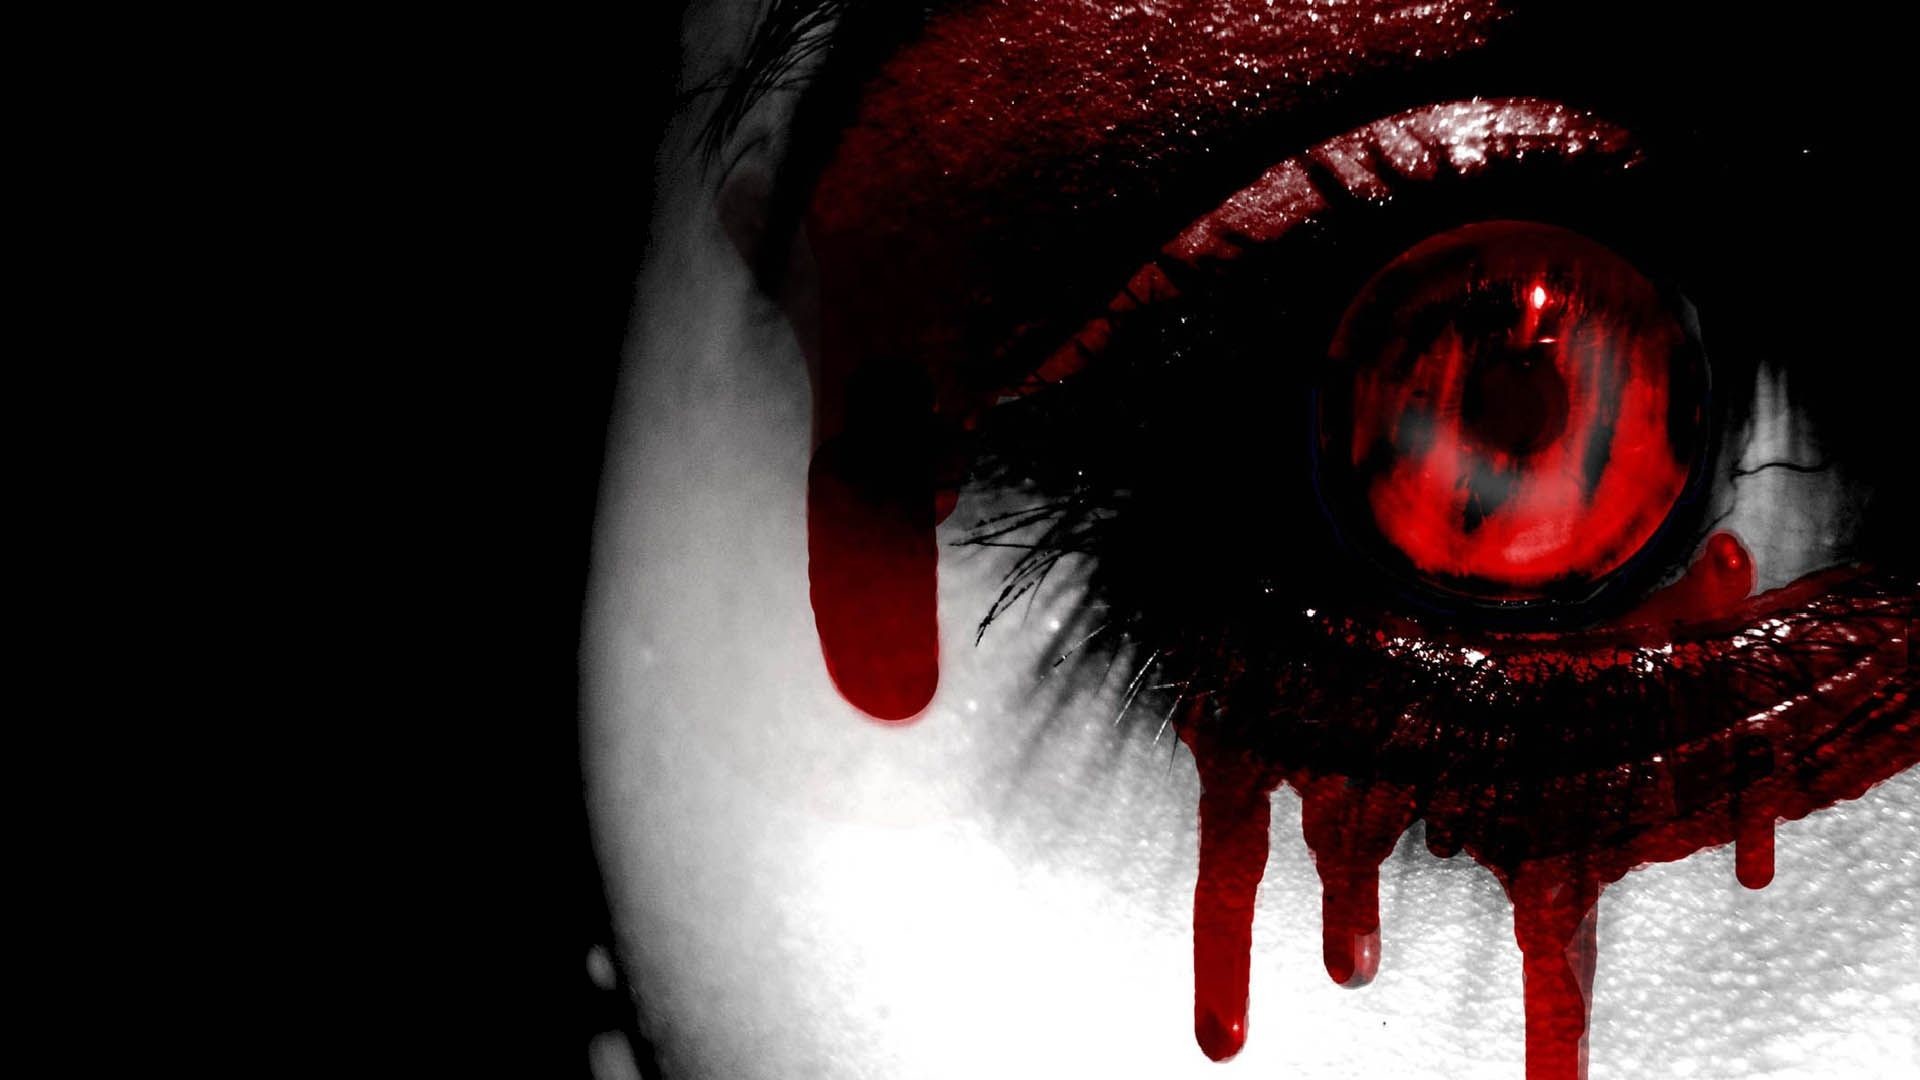 1920x1080 807 Creepy Wallpapers | Creepy Backgrounds Page 12